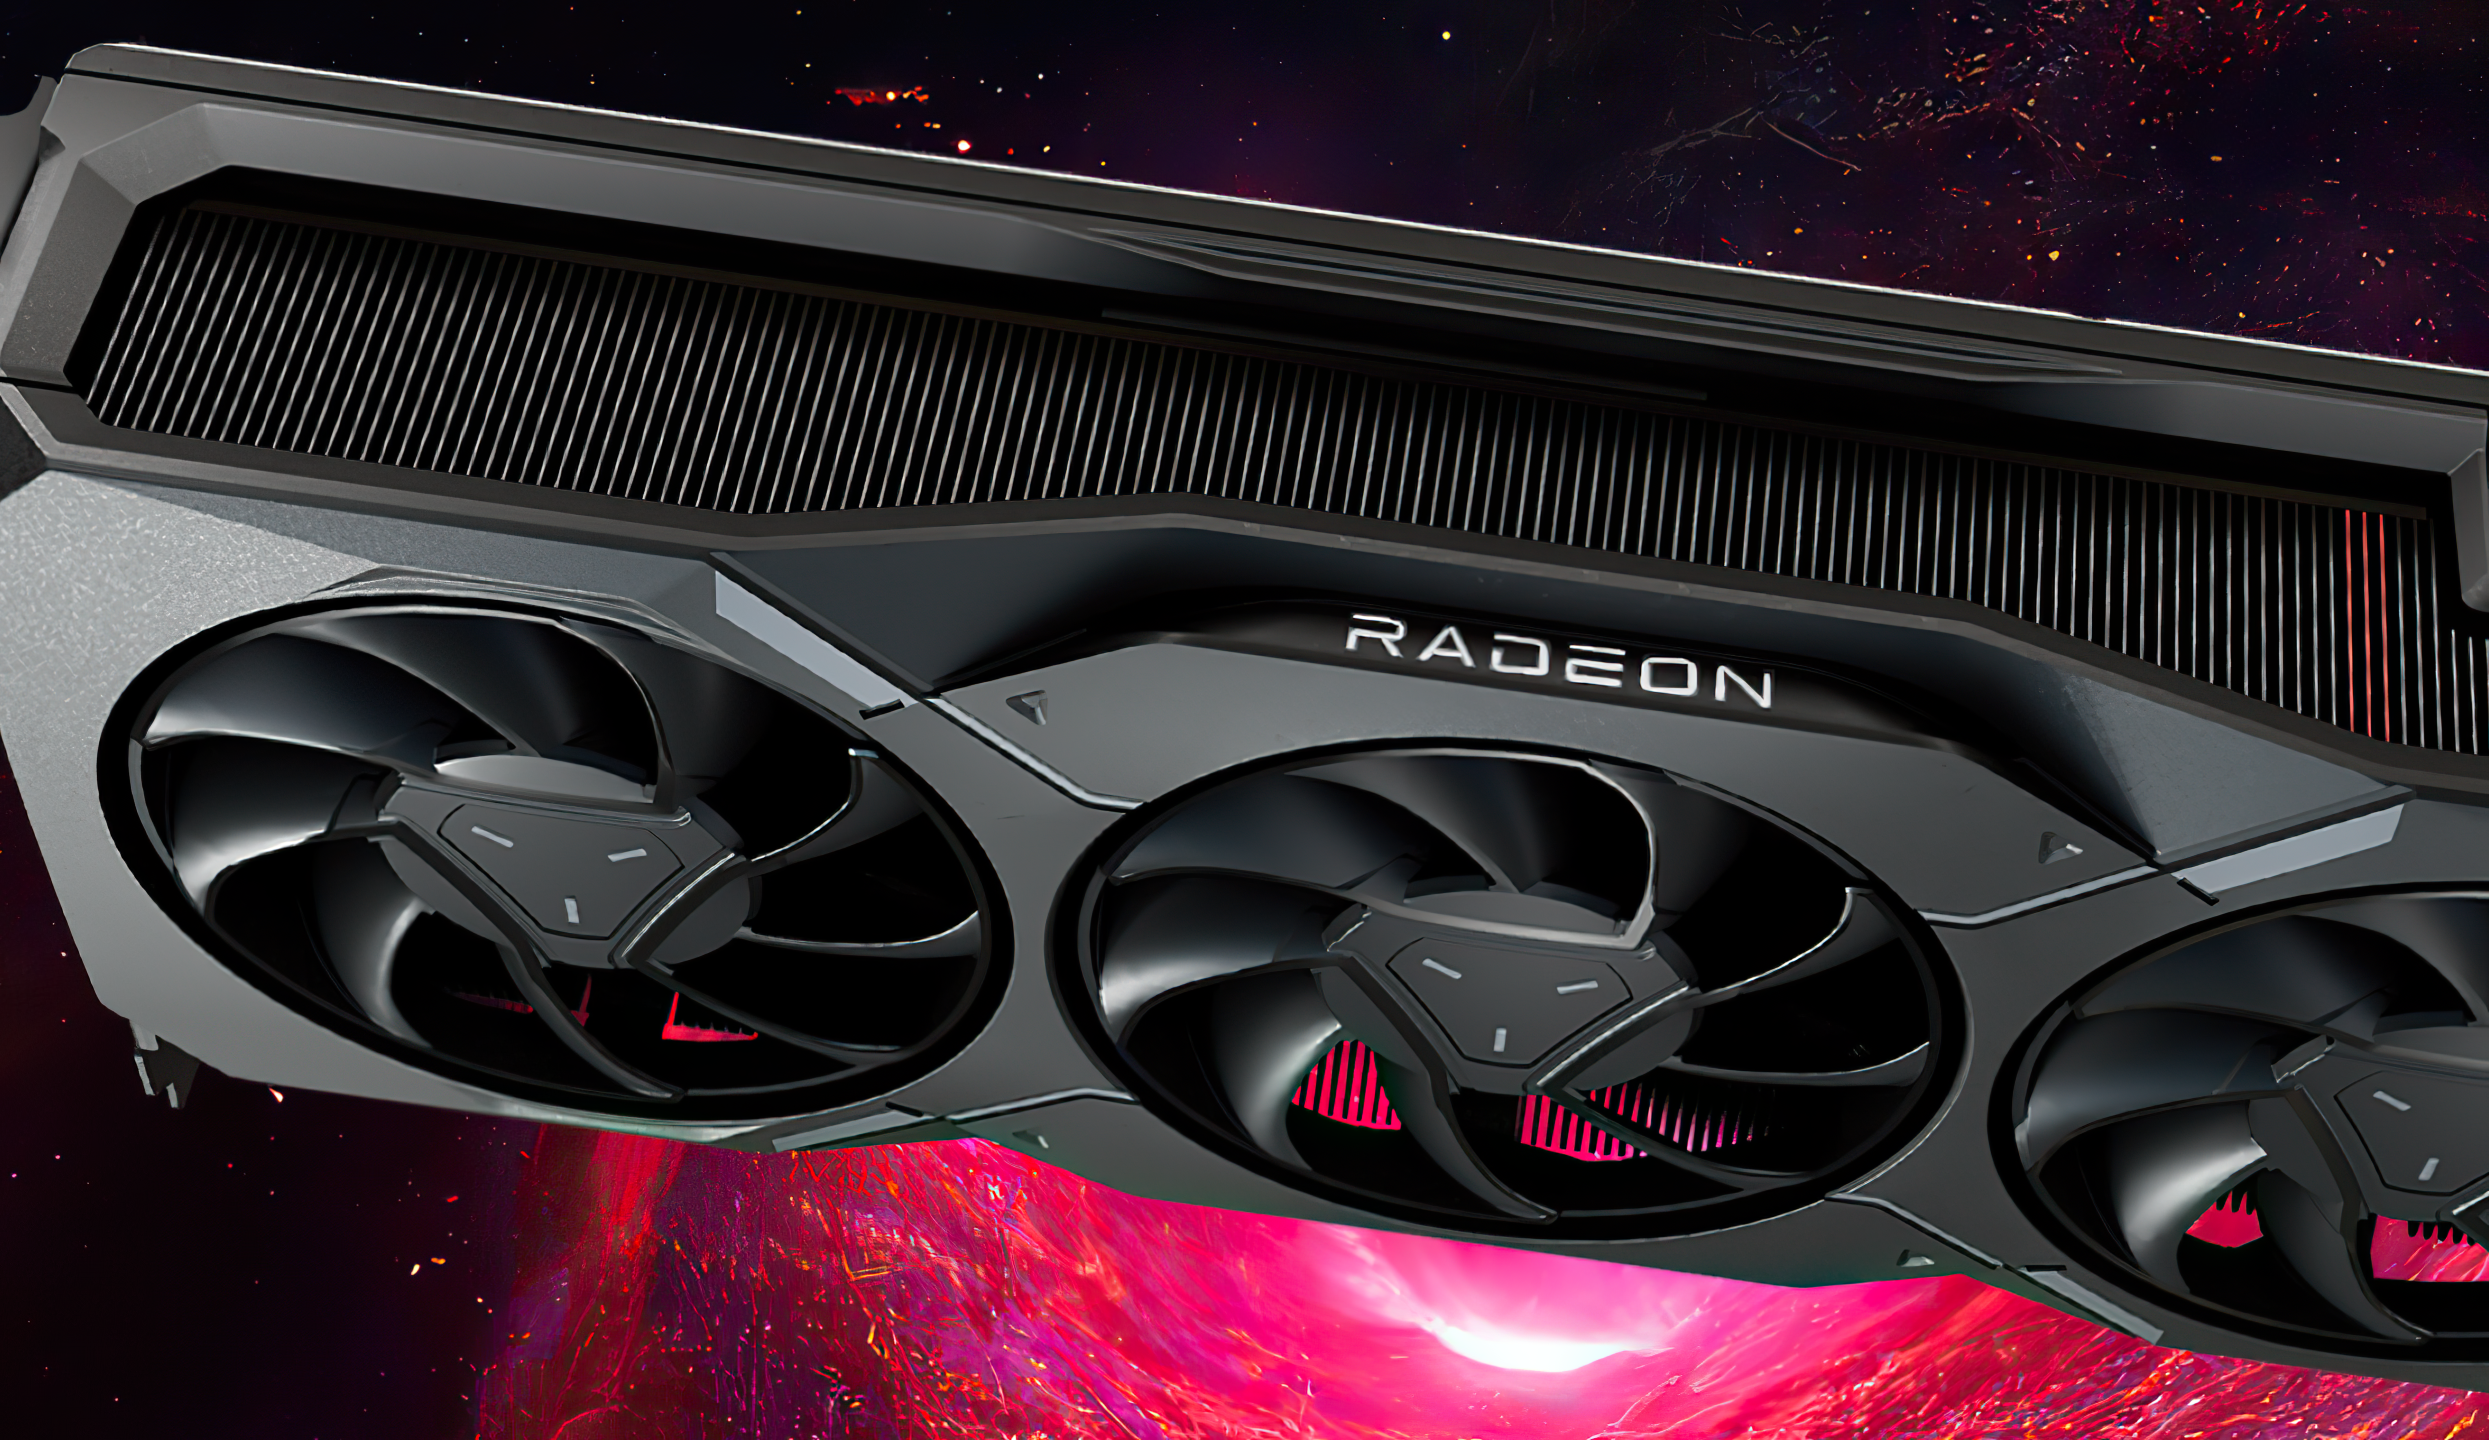 AMD could have released a competitor for the GeForce RTX 4090, but didn’t